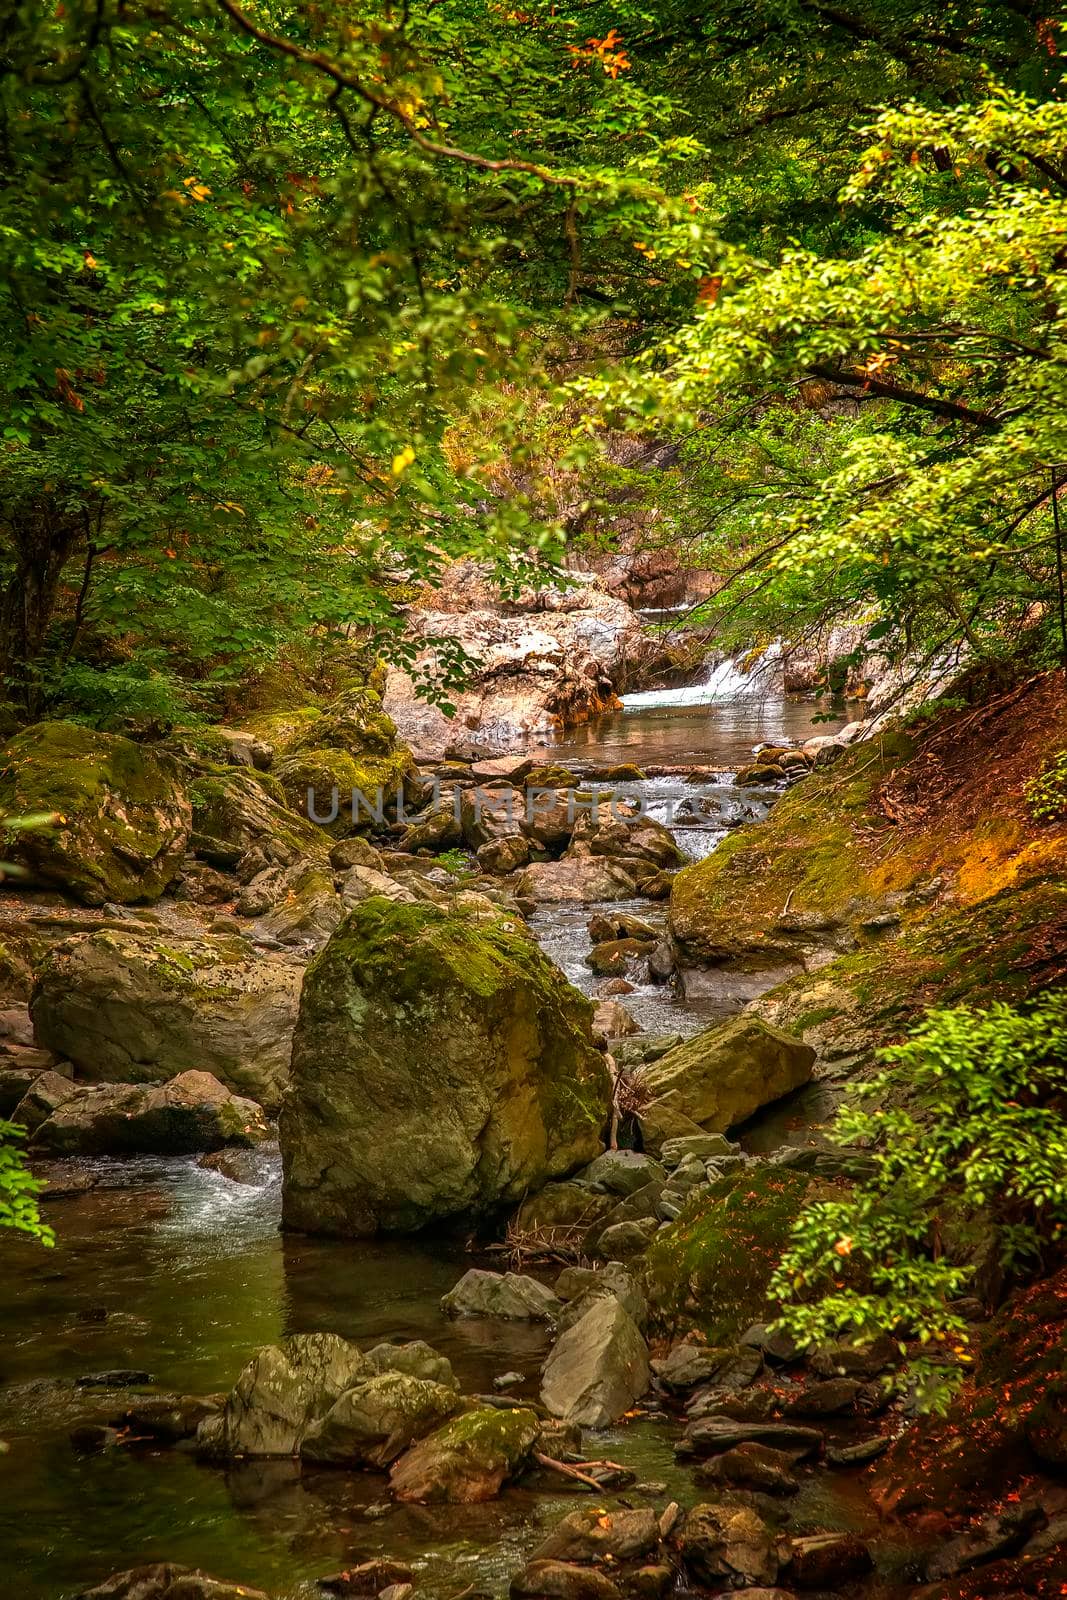 Rocky creek in the forest. River with rocks. densely overgrown forest with flowing stream nature background. by EdVal